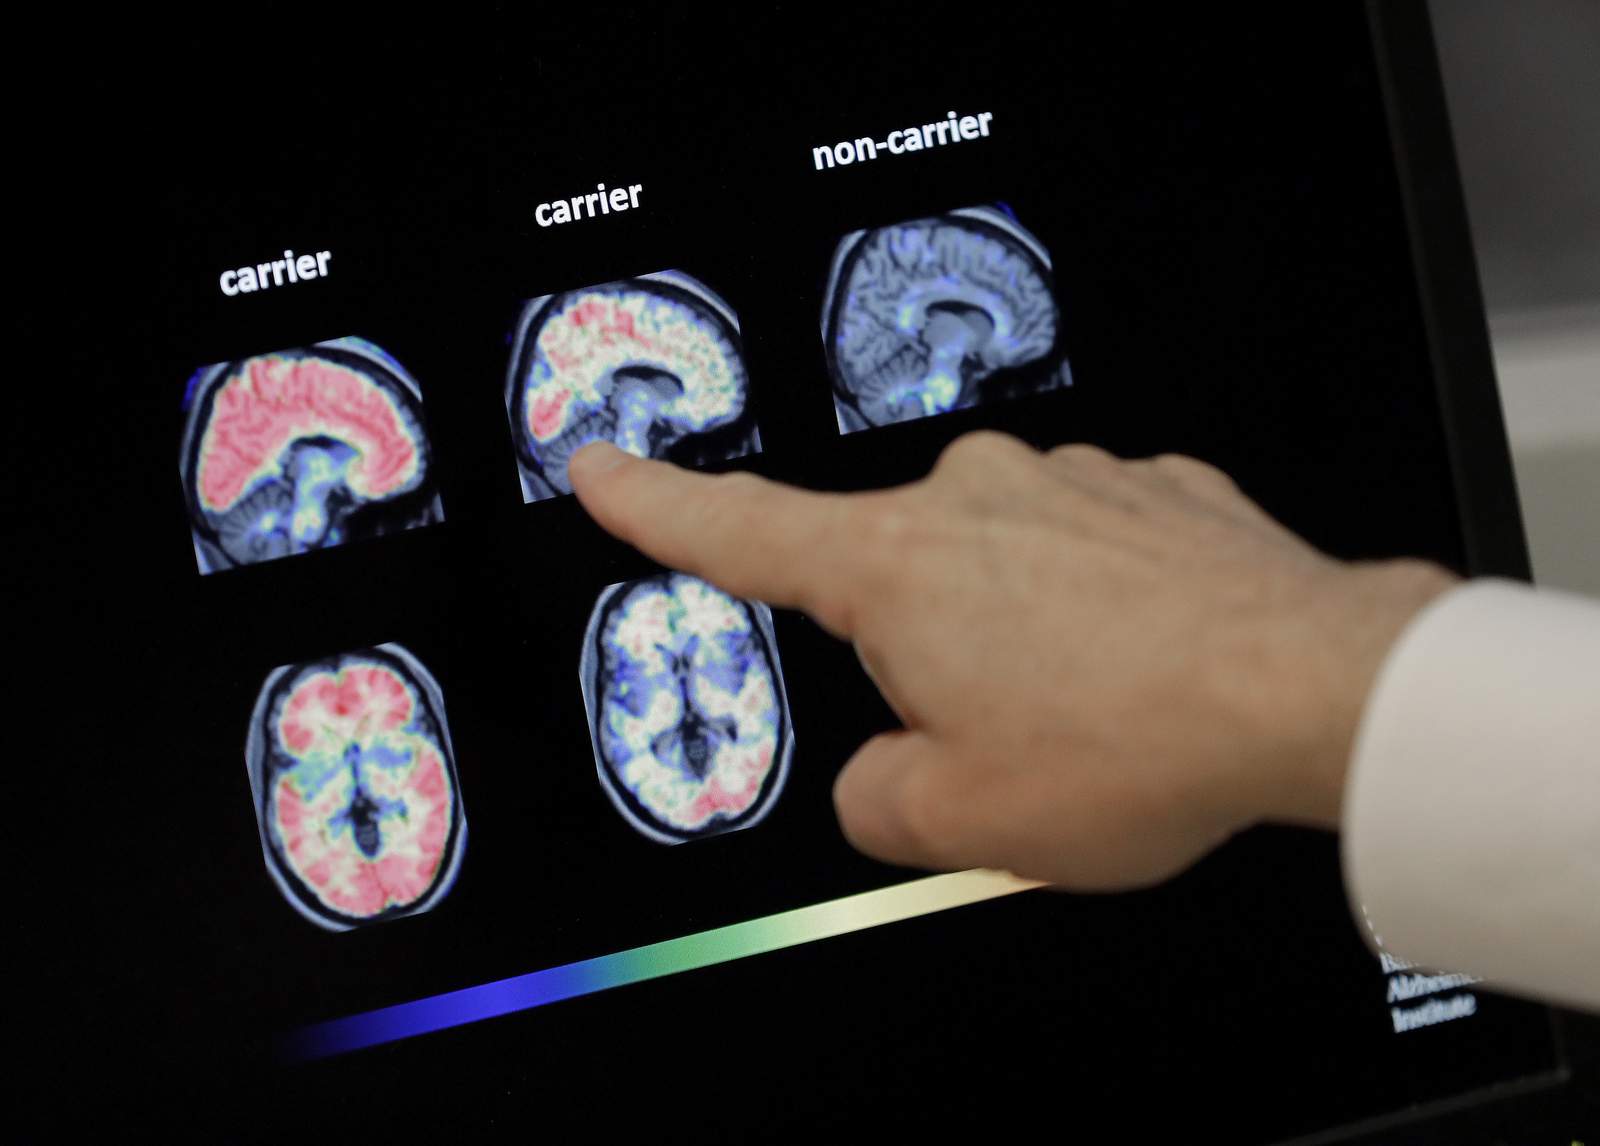 Medicare coverage for Alzheimer brain scans in question